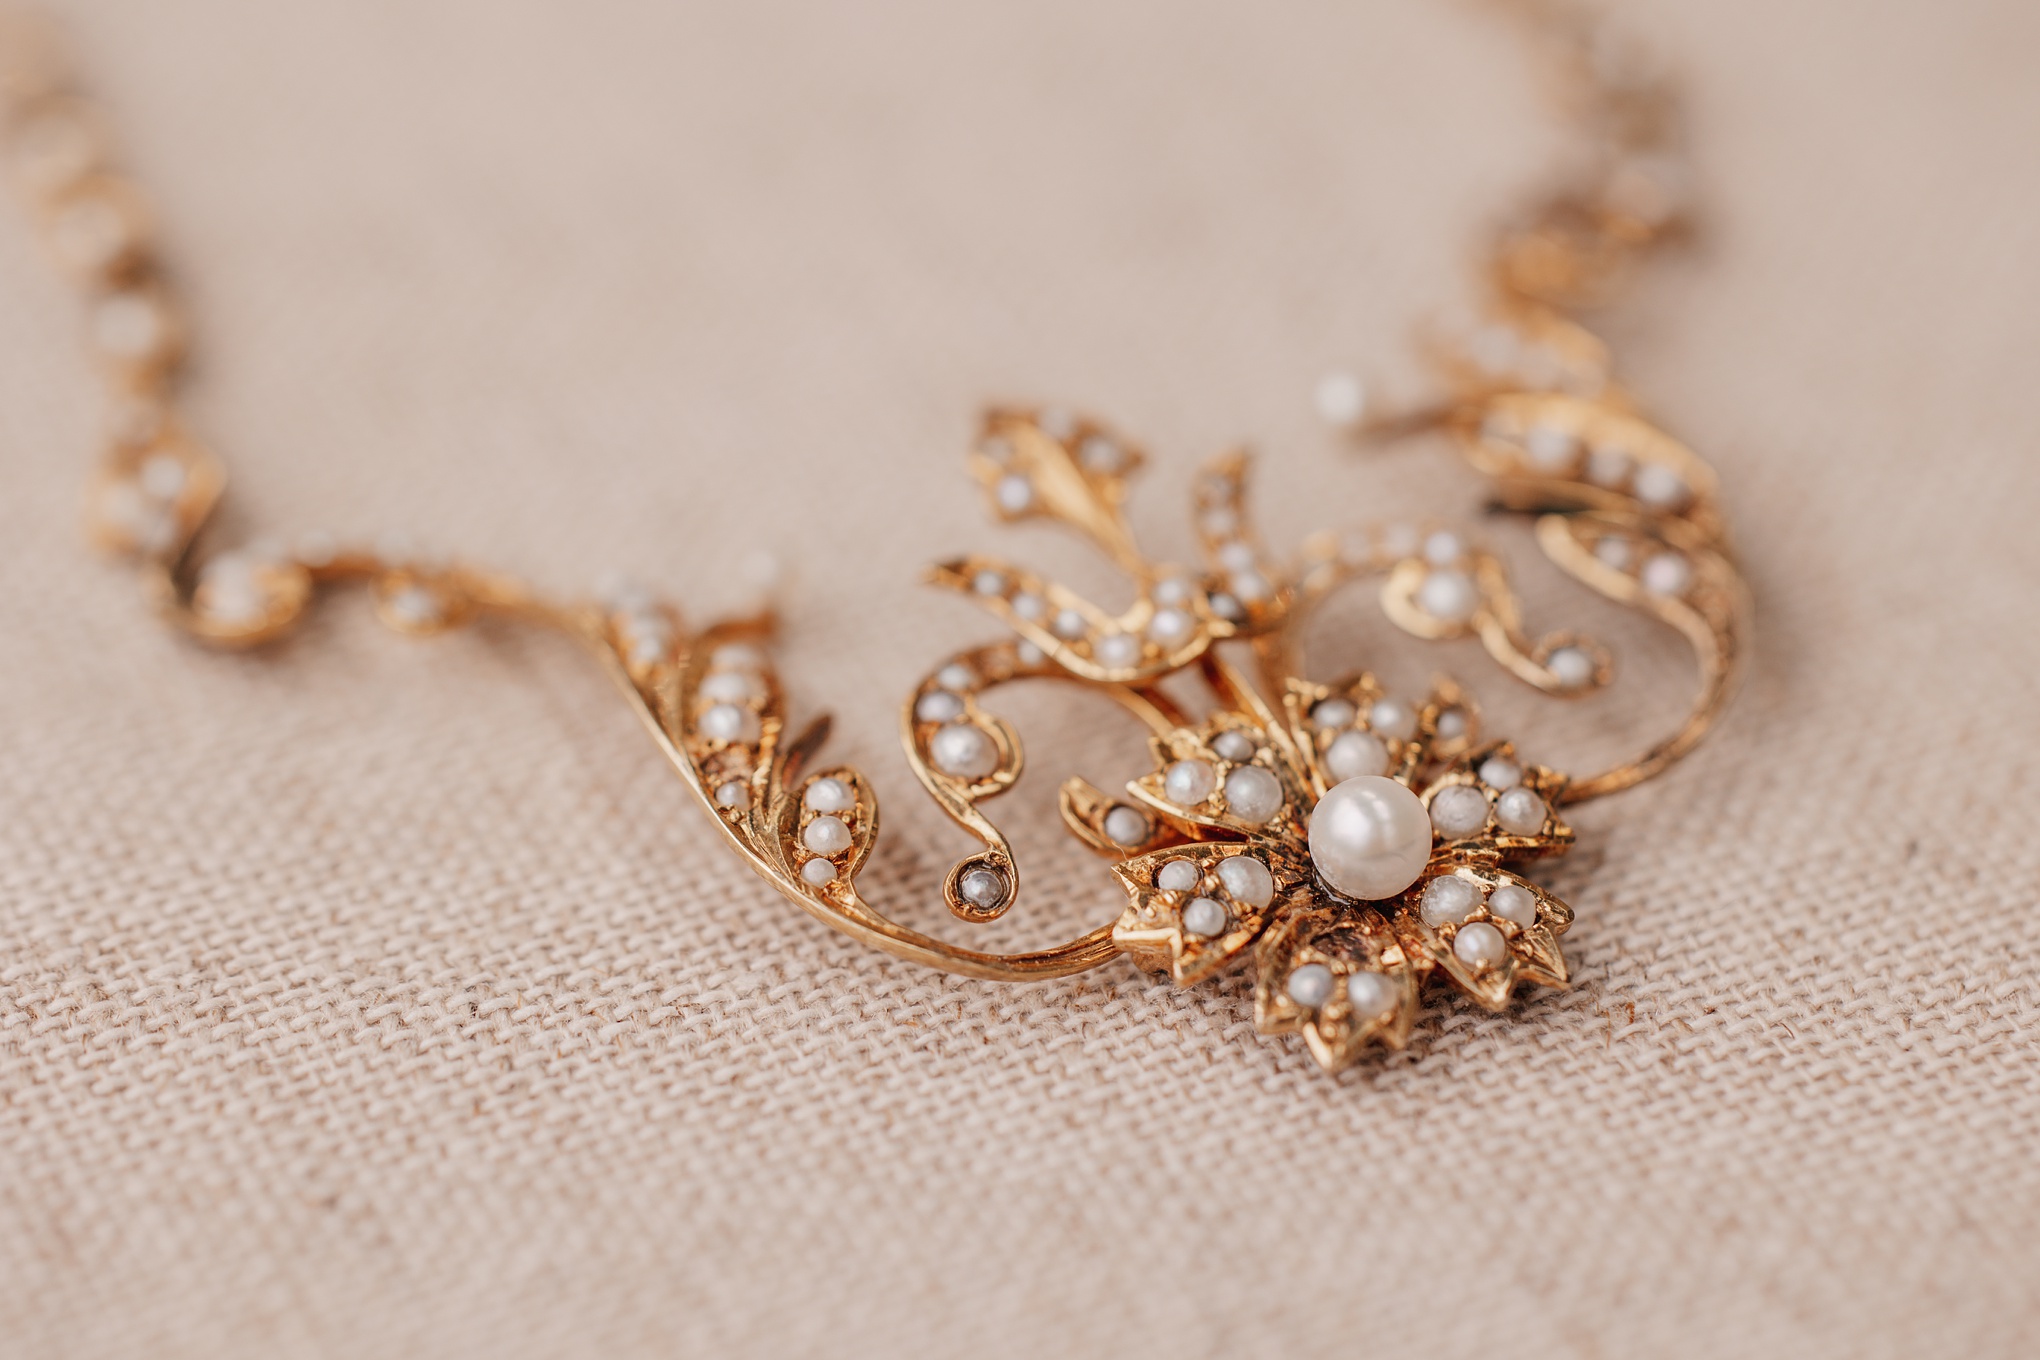 Vintage pearl and gold necklace worn by bride at wedding